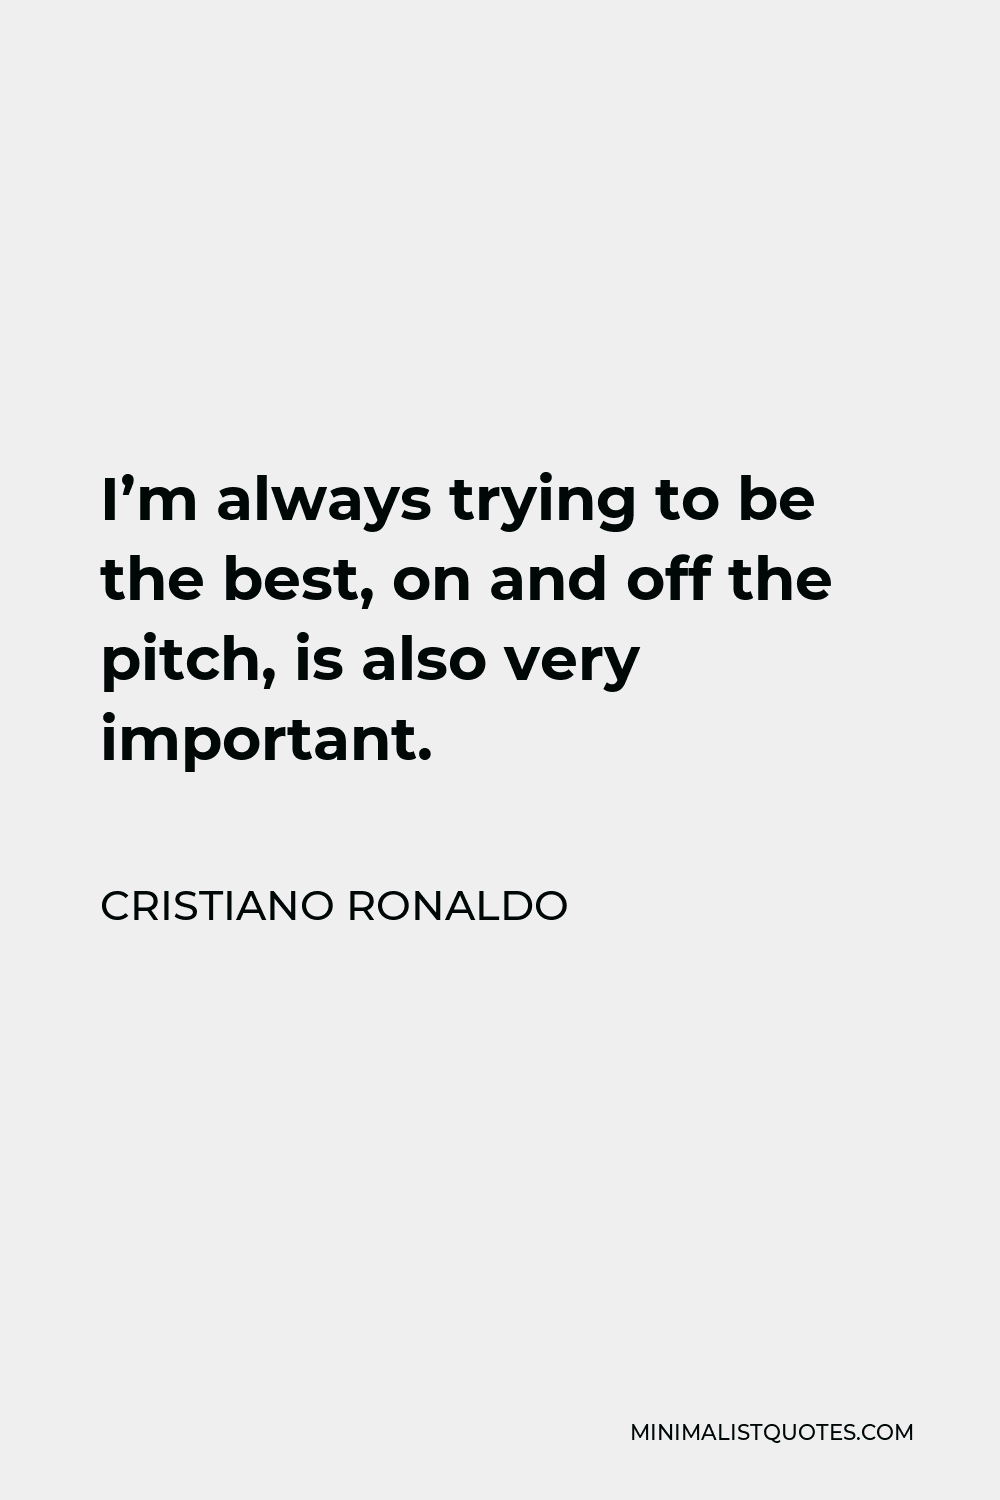 Cristiano Ronaldo Quote - I’m always trying to be the best, on and off the pitch, is also very important.